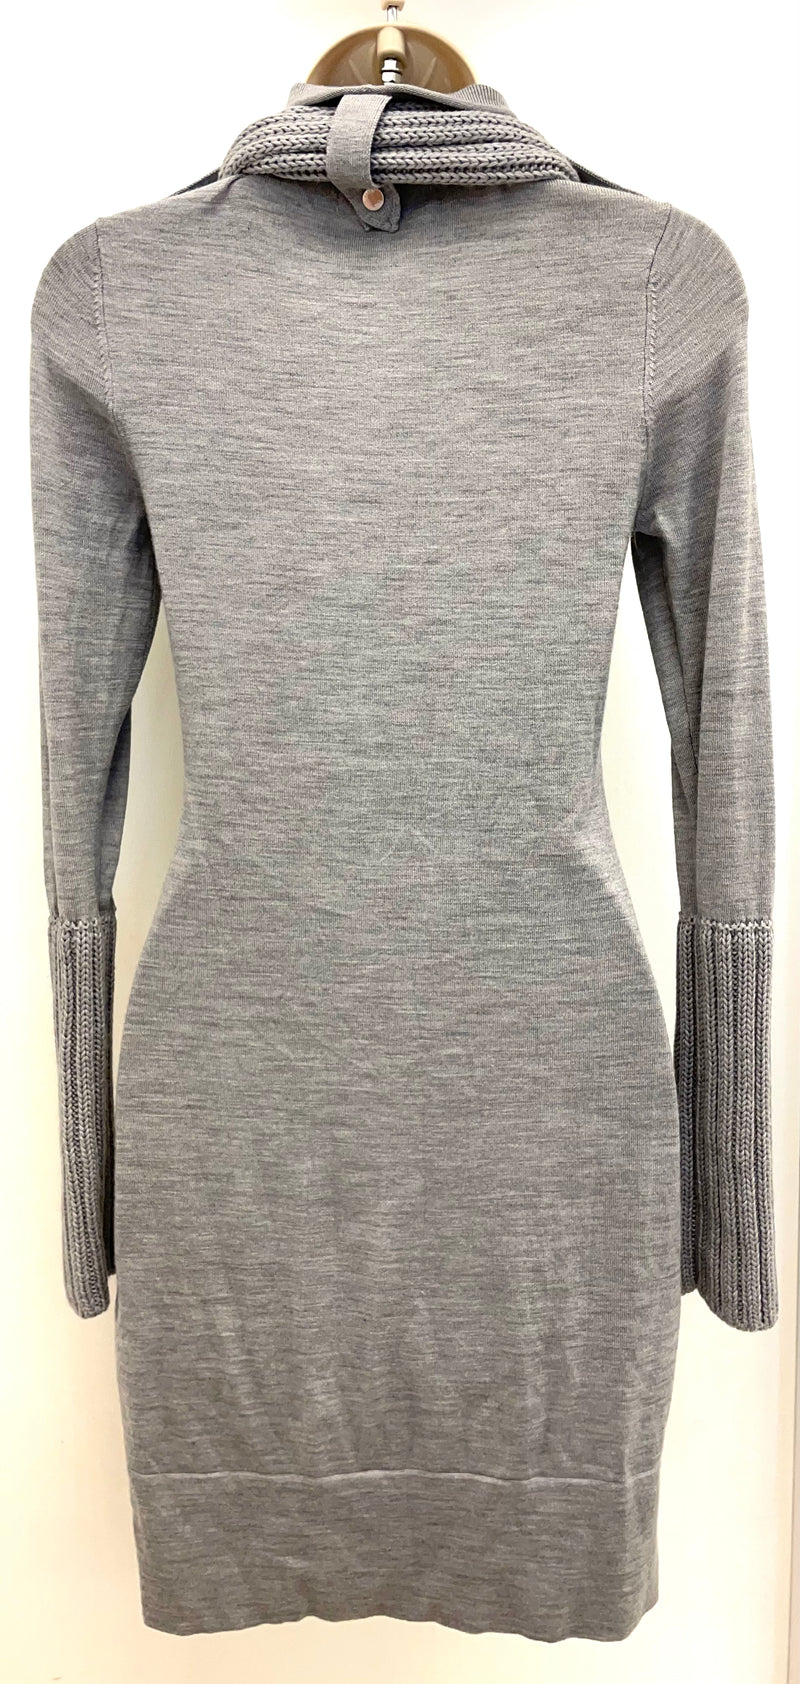 Grey Knit Jumper Dress with Scarf UK 6